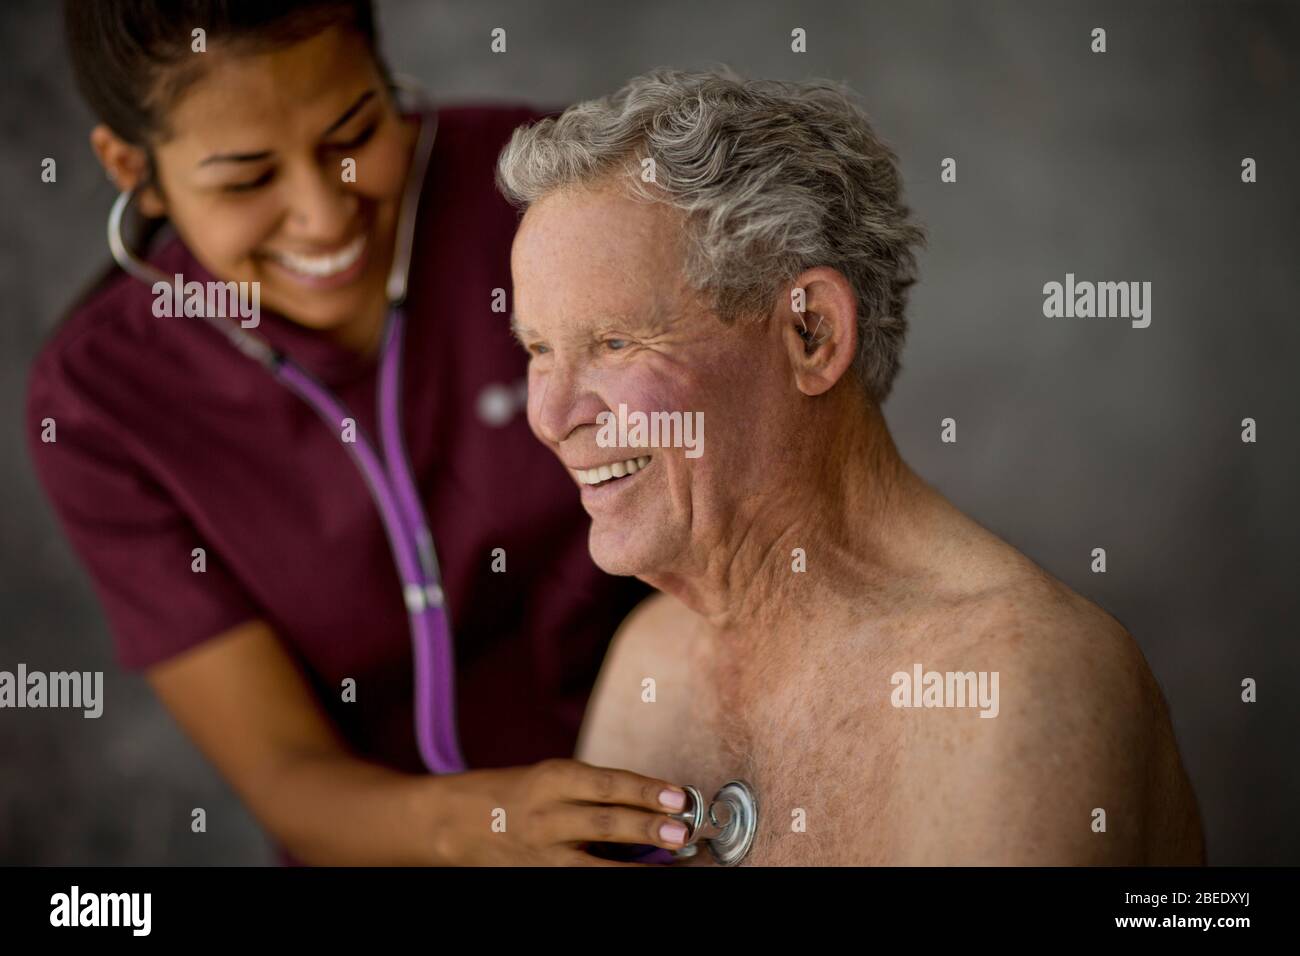 Smiling young nurse listening to a senior patient's heartbeat Stock Photo